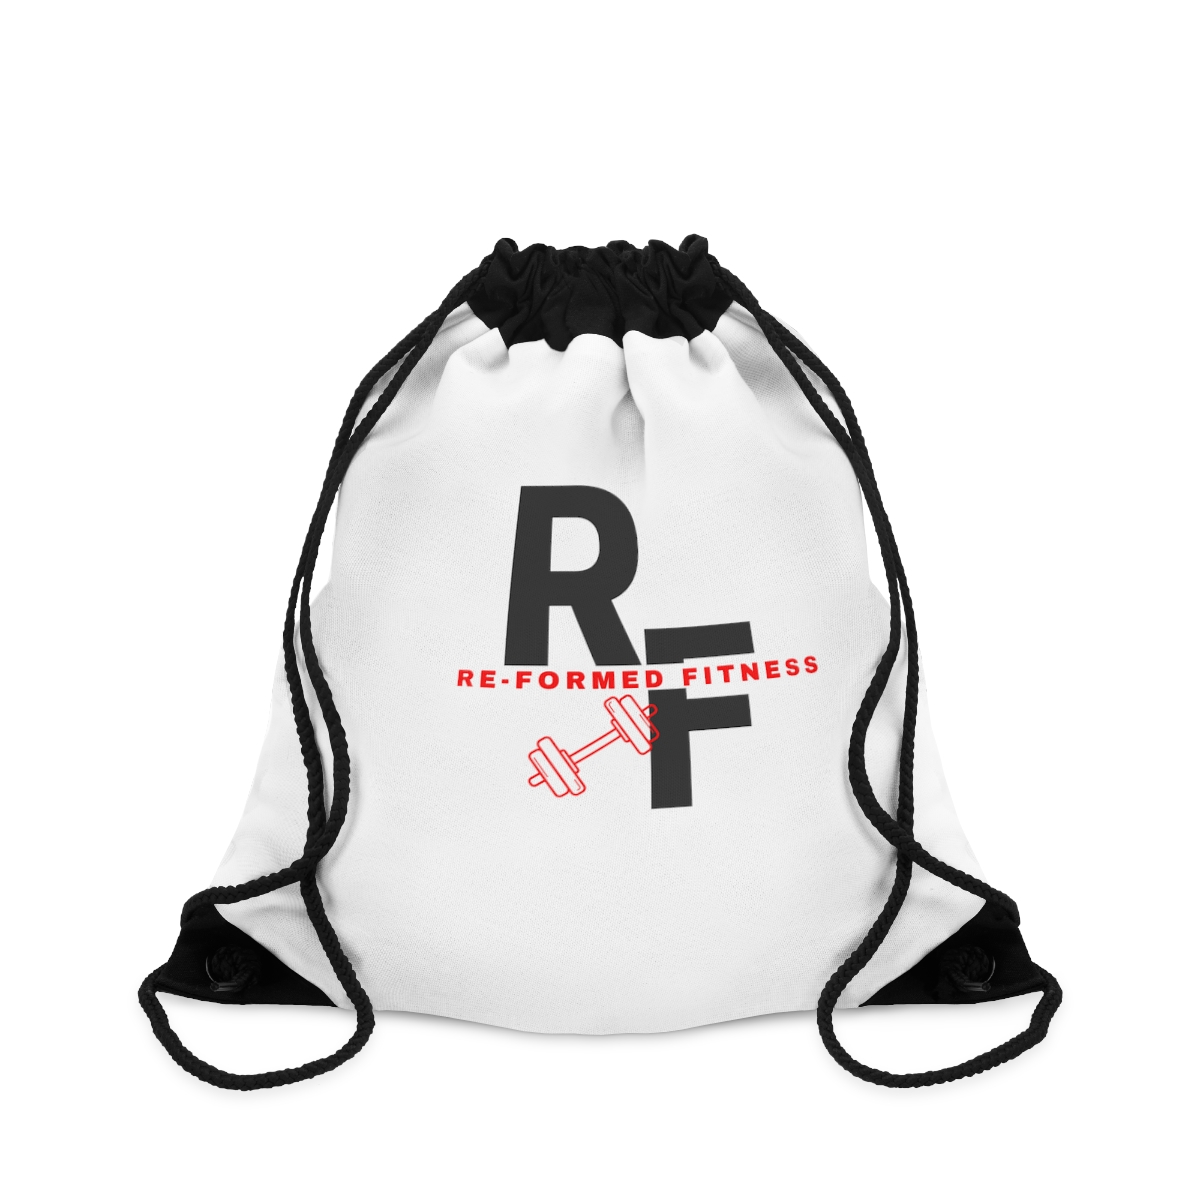 Re-Formed Fitness Brand Drawstring Bag product thumbnail image